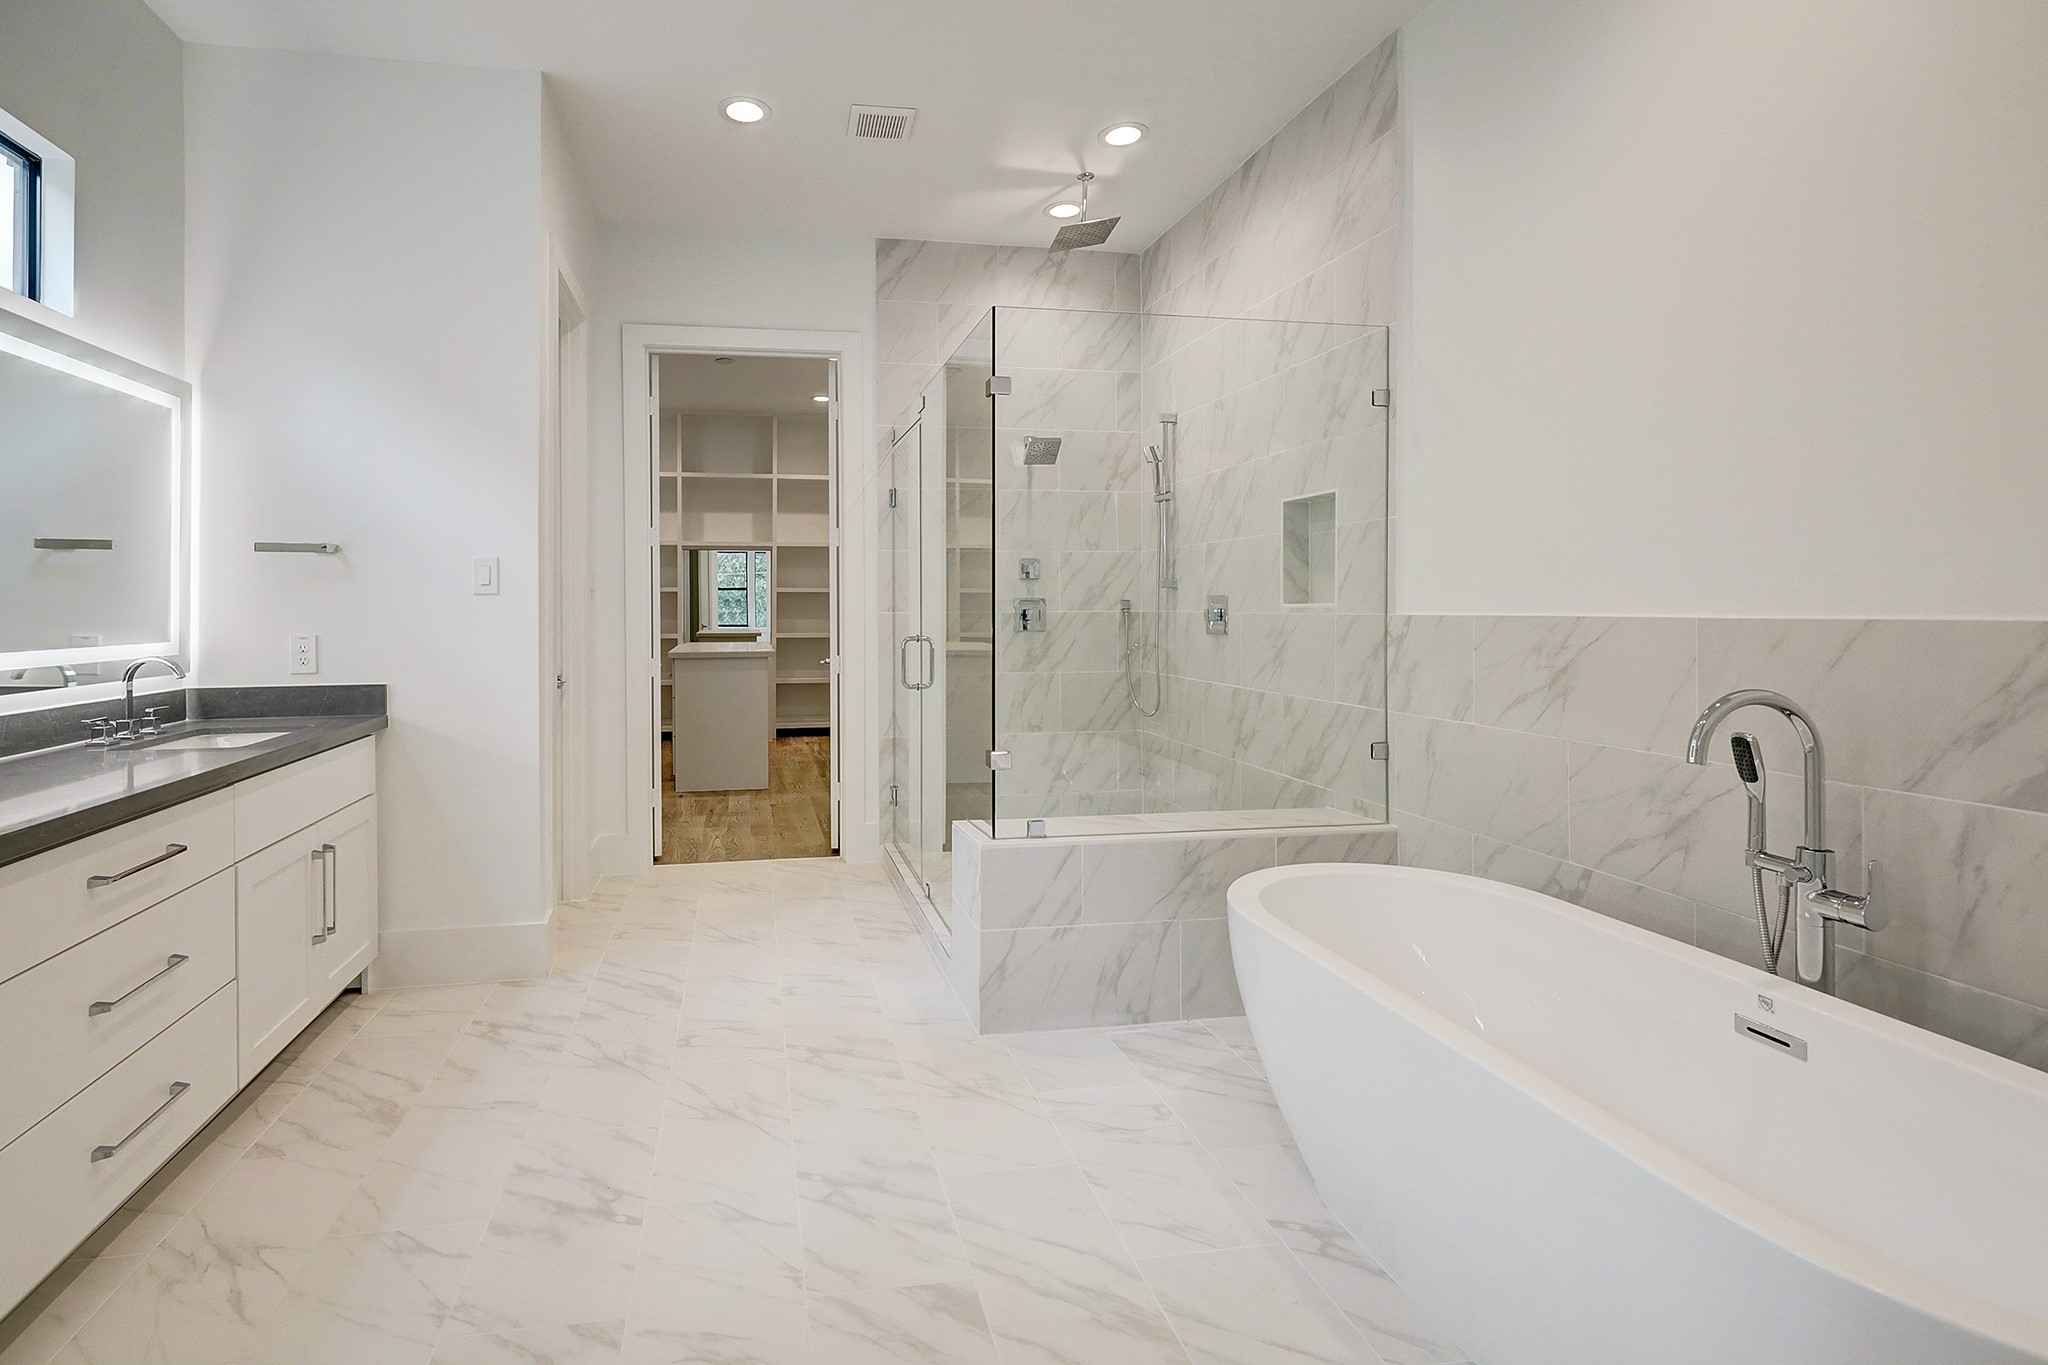 Primary bathroom suite with double sinks, LED mirrors, and separate soaking tub and shower